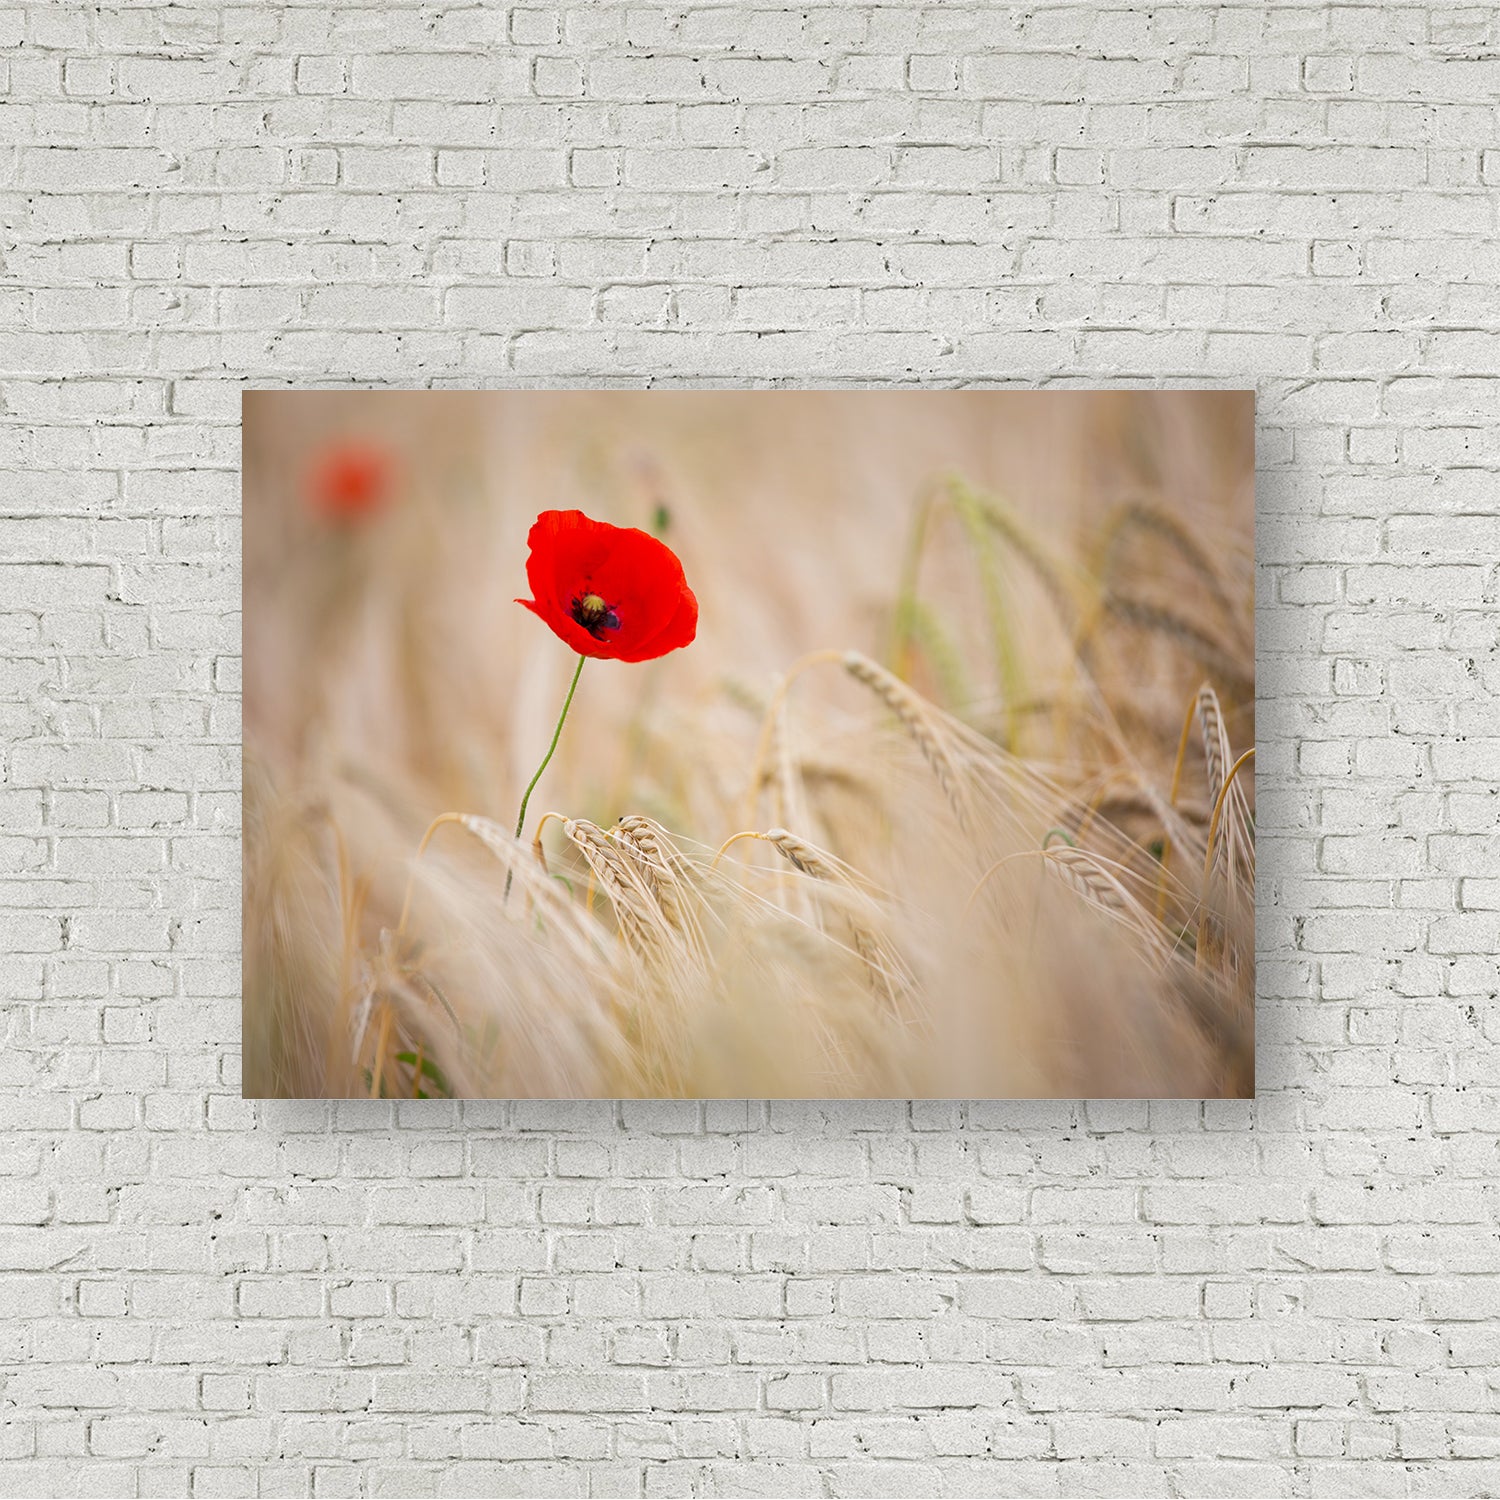 Of Poppies and Barley